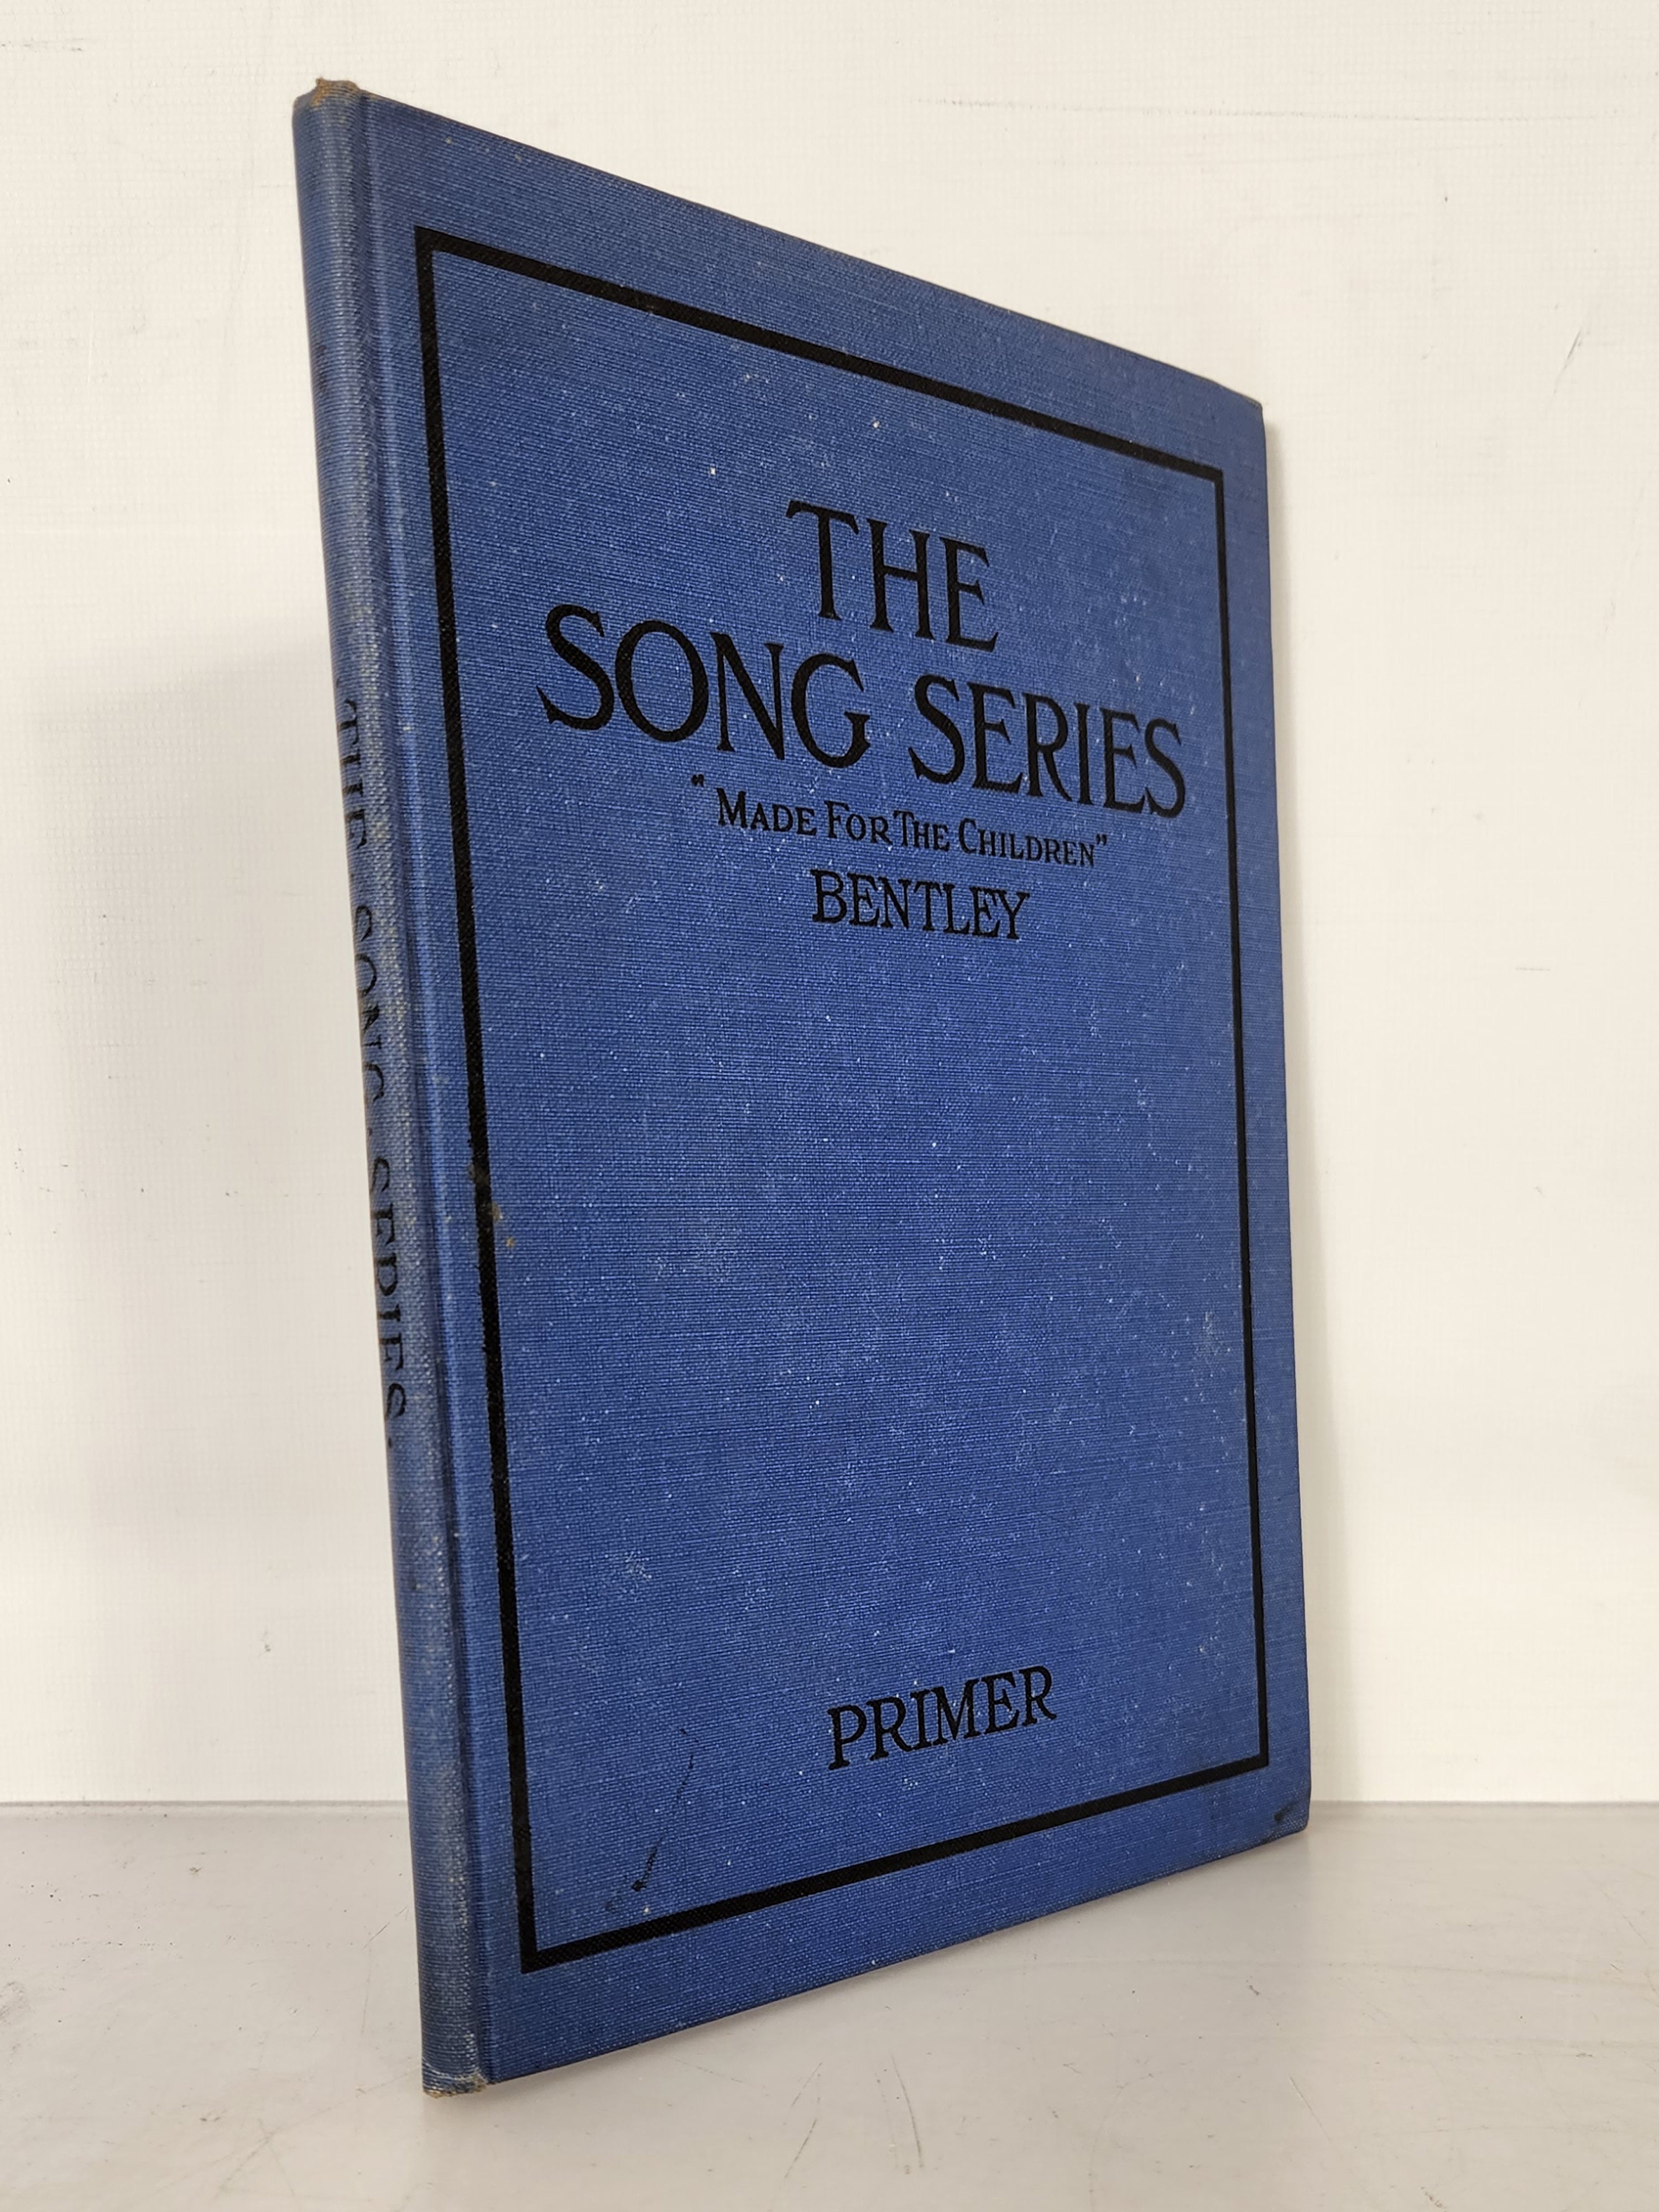 The Song Series Made for Children by Alys Bentley 1907